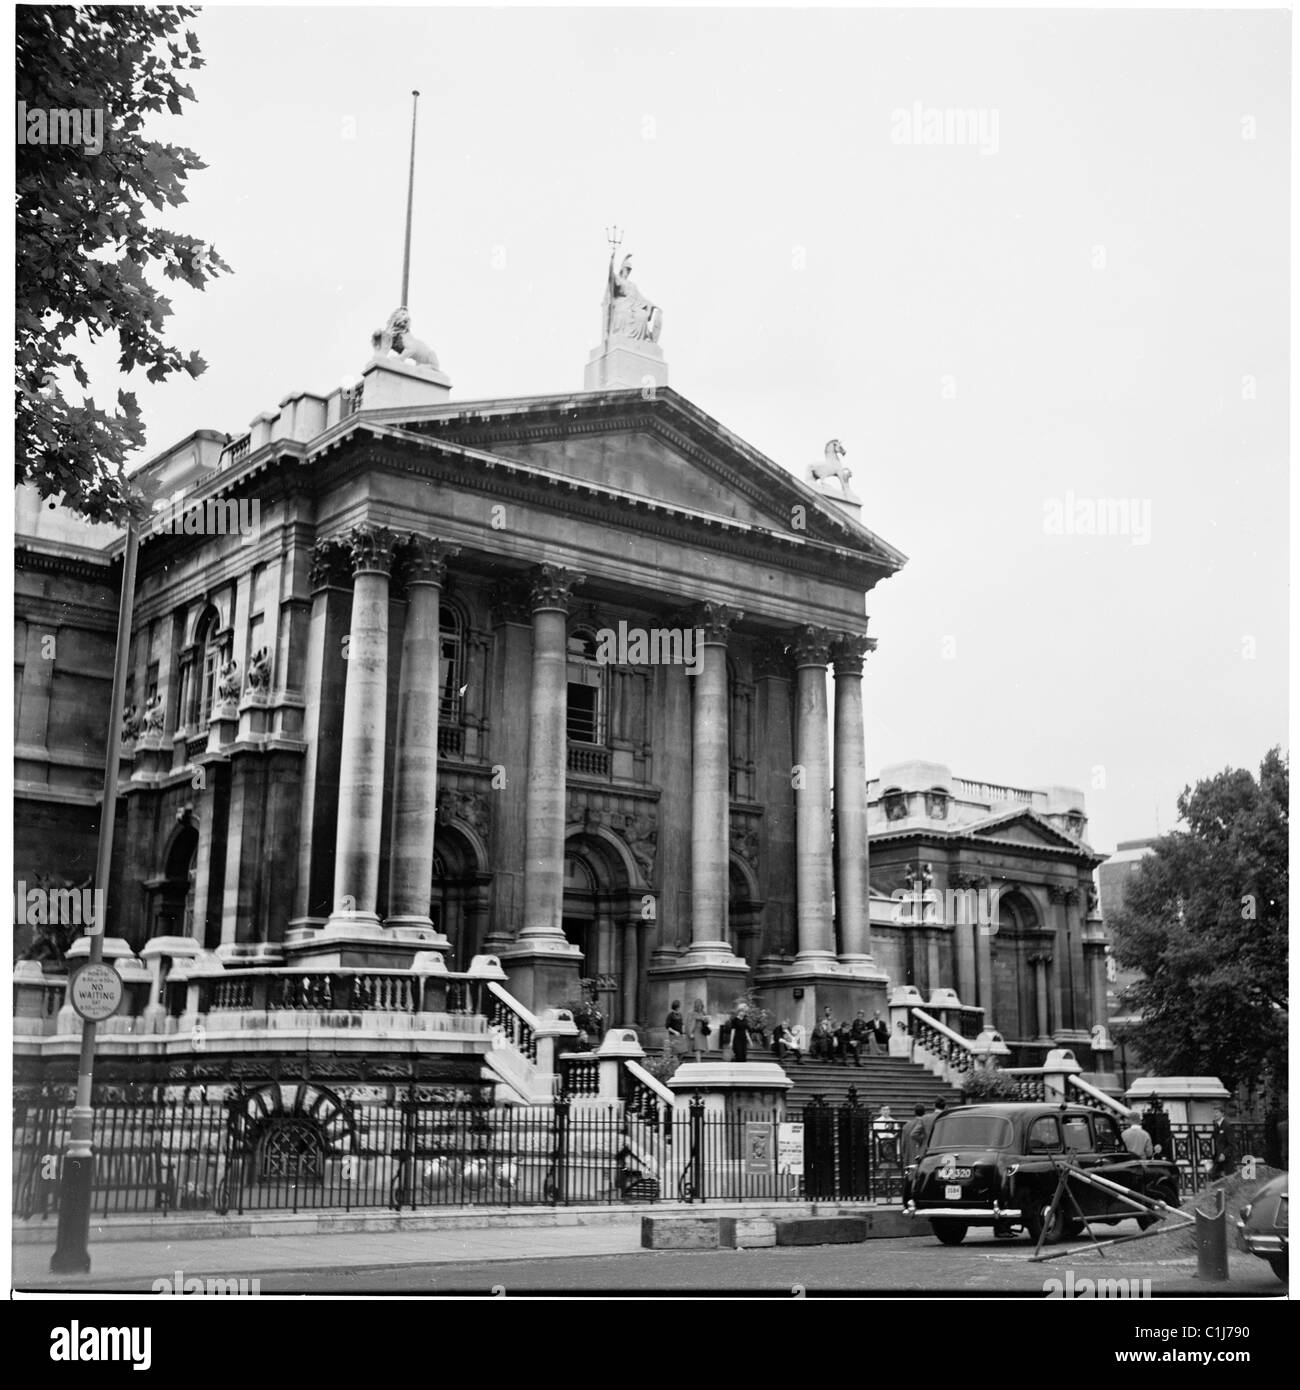 1950s, exterior of the Tate Gallery, previously known as The National Gallery of British Art, on Millbank, Pimlico, Westminster London, England, UK. Stock Photo